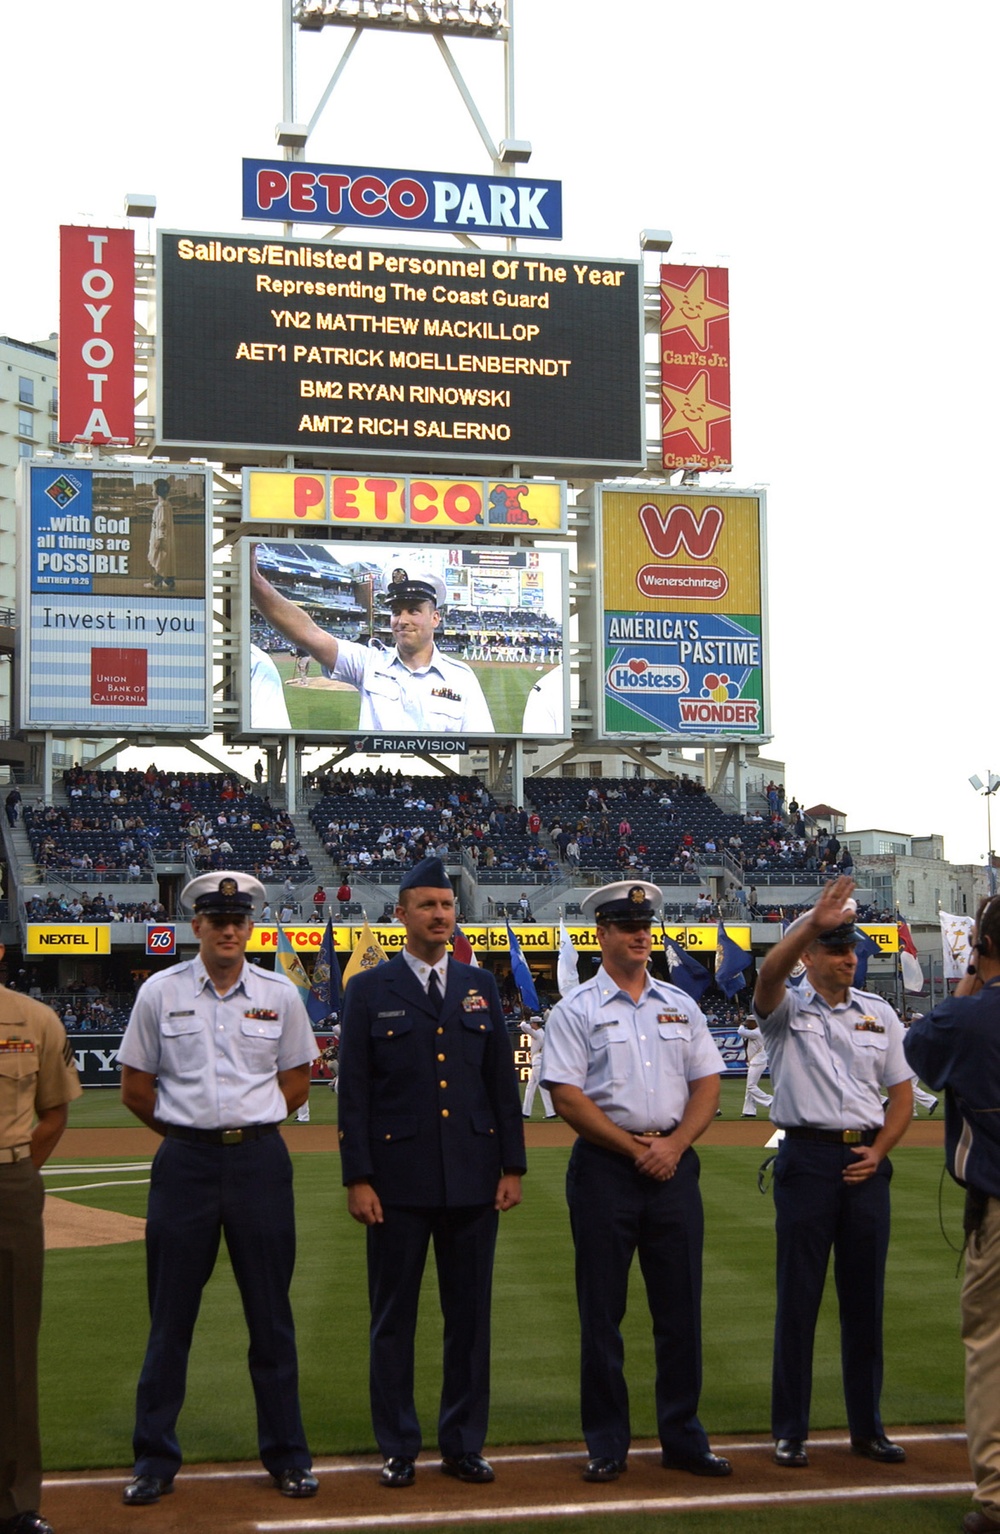 SAN DIEGO PADRES MILITARY OPENING DAY